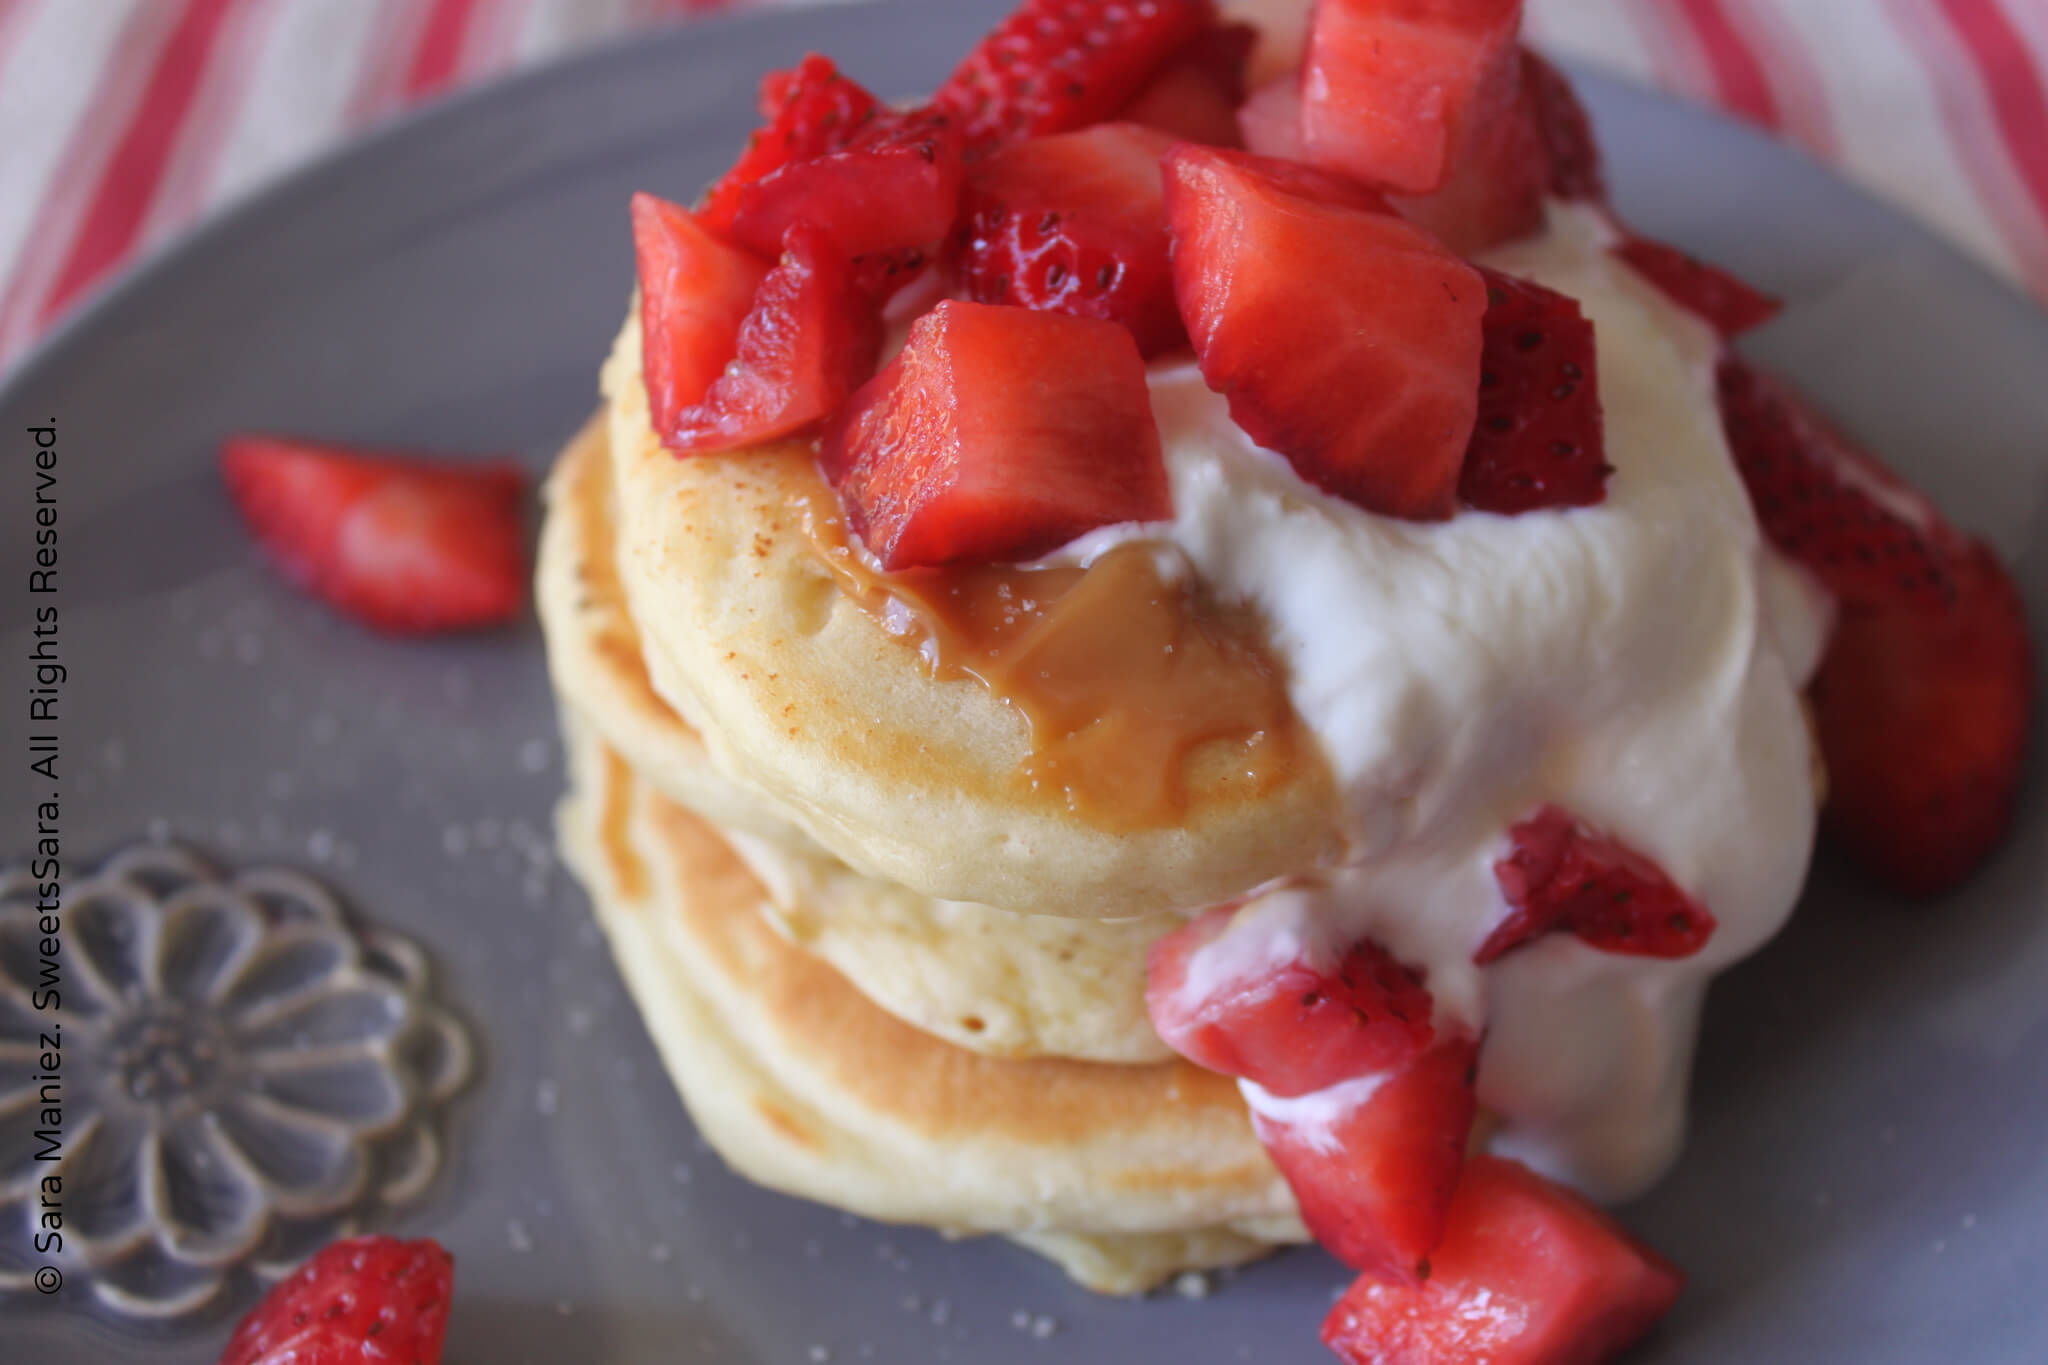 Strawberry Buttermilk Pancakes: These buttermilk pancakes are thick, fluffy, moist, cake-like pancakes. They work well with fresh strawberries in the batter, on top only or both. Dulce de Leche is another flavor component in this assemblage that provides a smooth, caramel punch of sweet and it compliments the Greek yogurt well. #pancakes #buttermilk #strawberries #brunch #breakfast #Greekyogurt